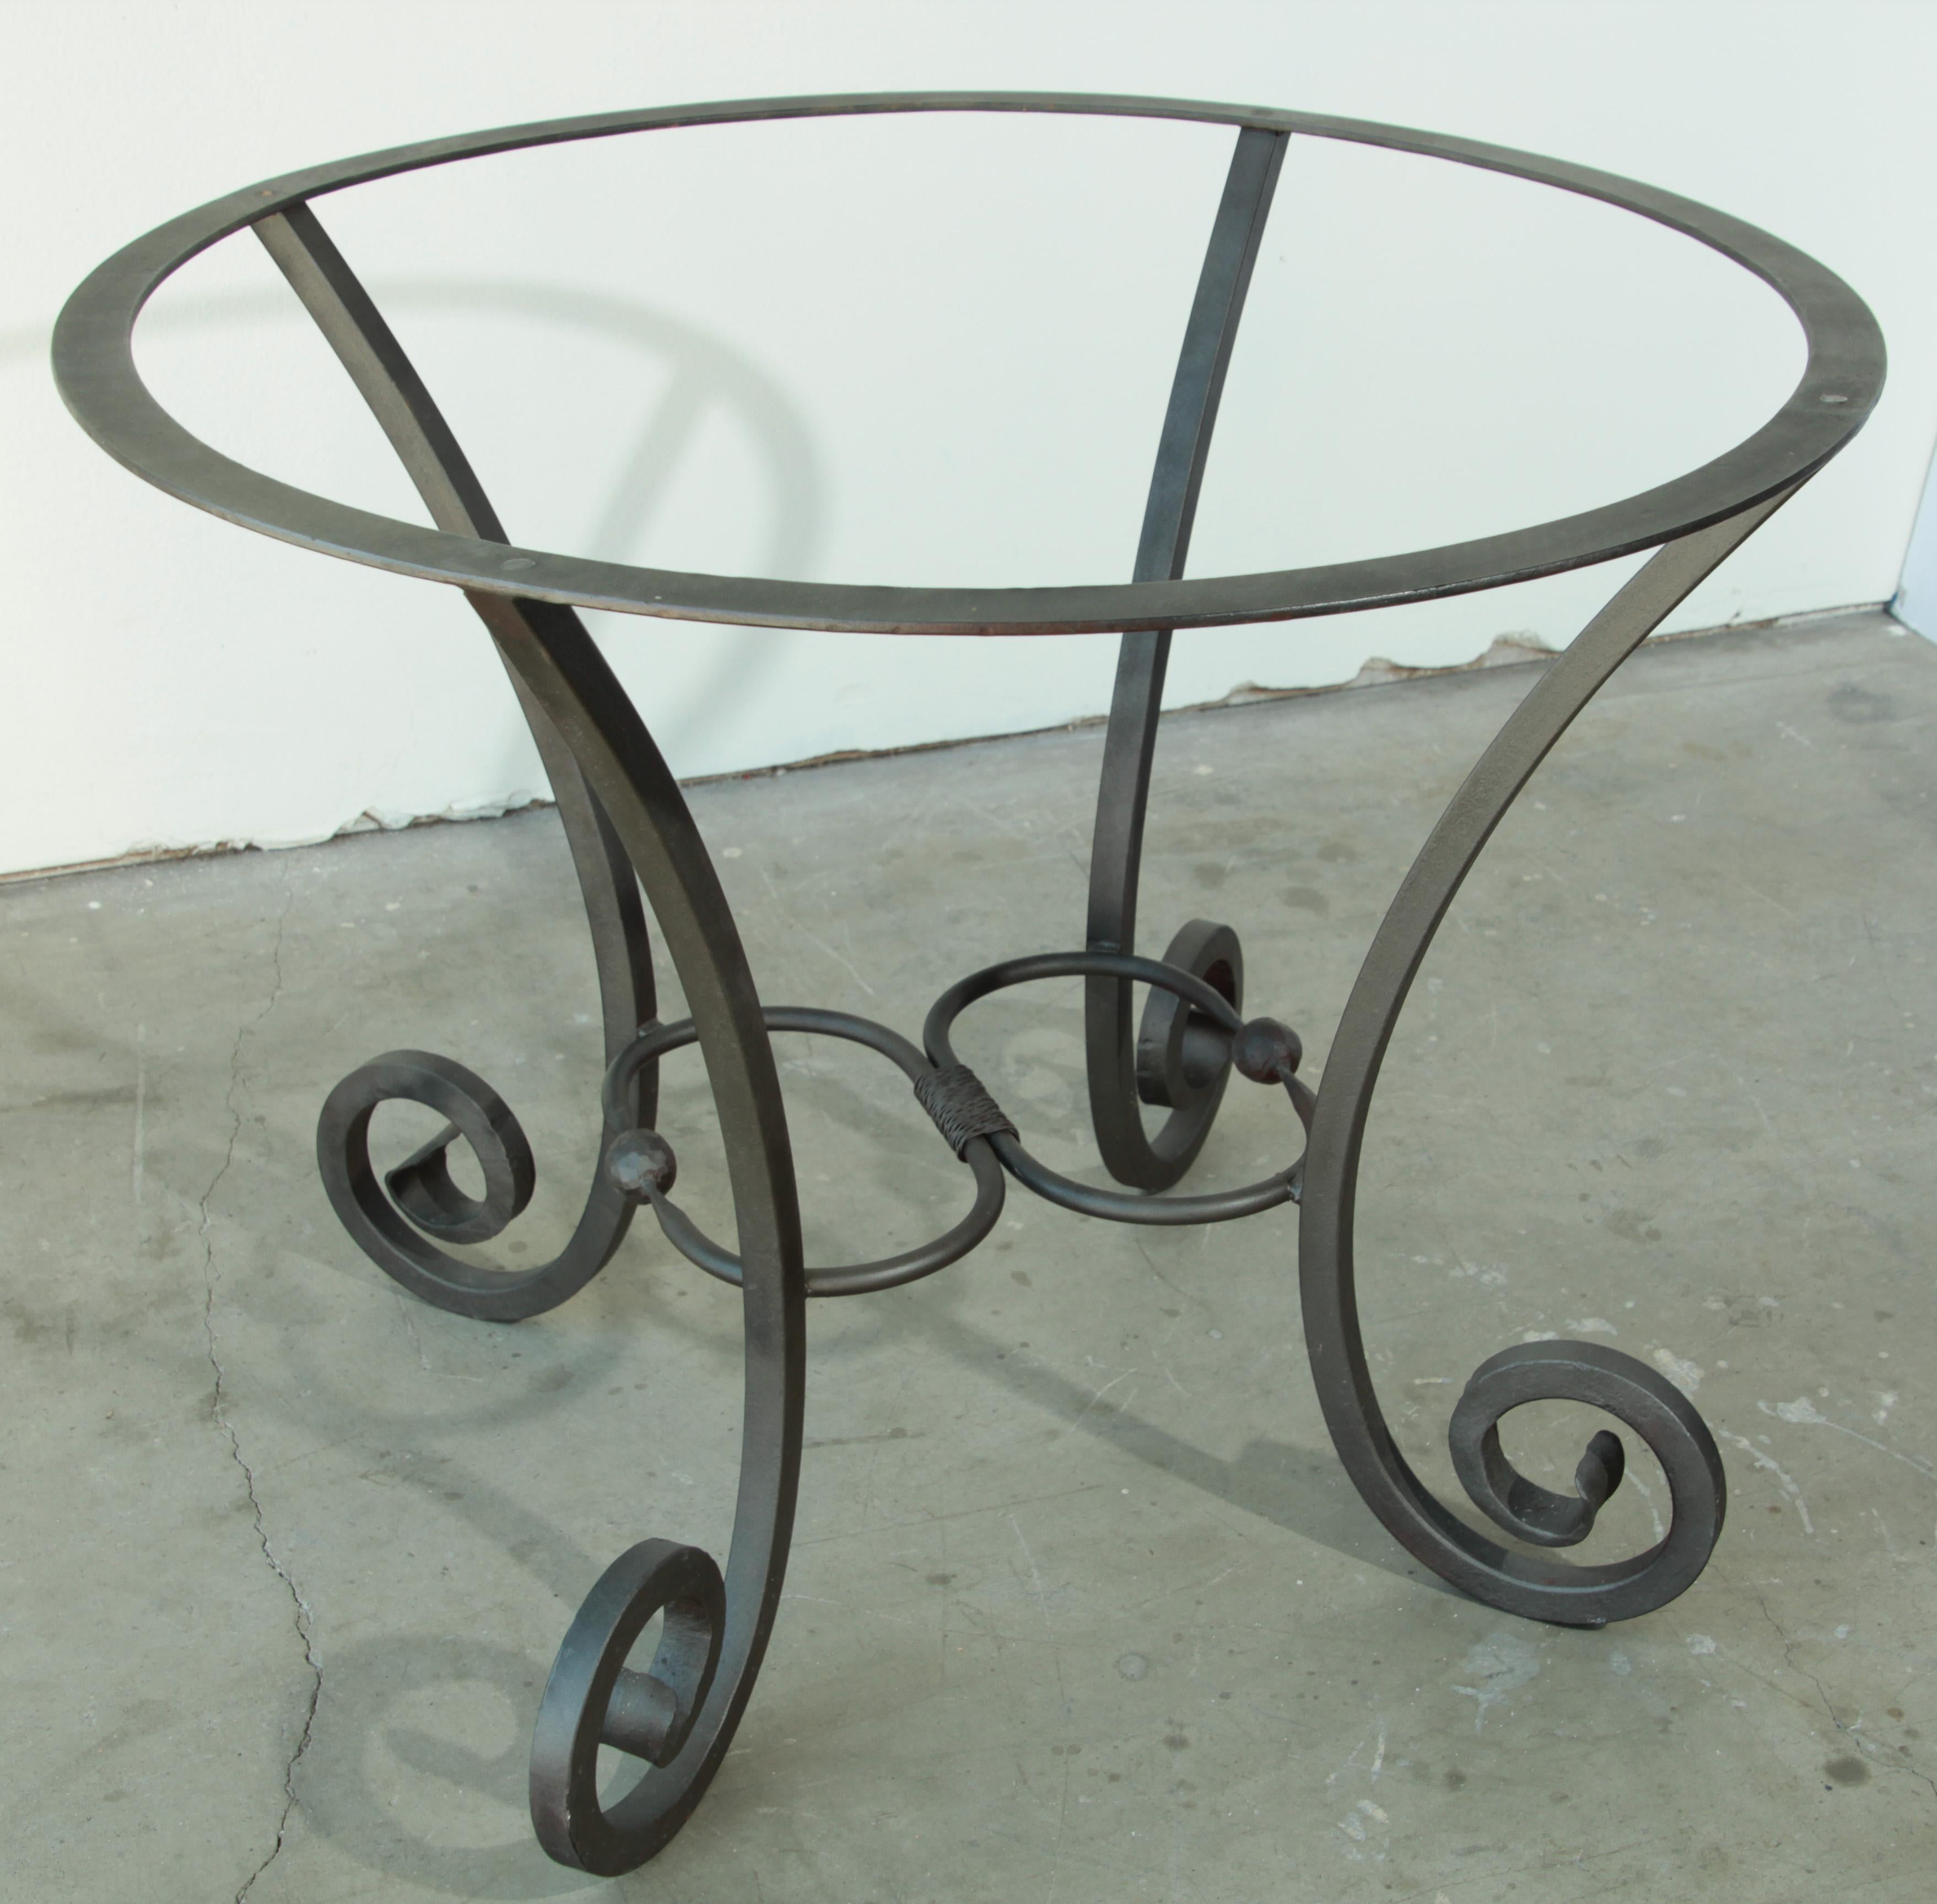 Hand forged Spanish iron table base.
Curved legs and two unique turned iron with two balls in the center.
Wrought iron dining table pedestal with curved legs.
Could be use indoor or outdoor.
Spanish Moorish style.
Listing is for the base only and